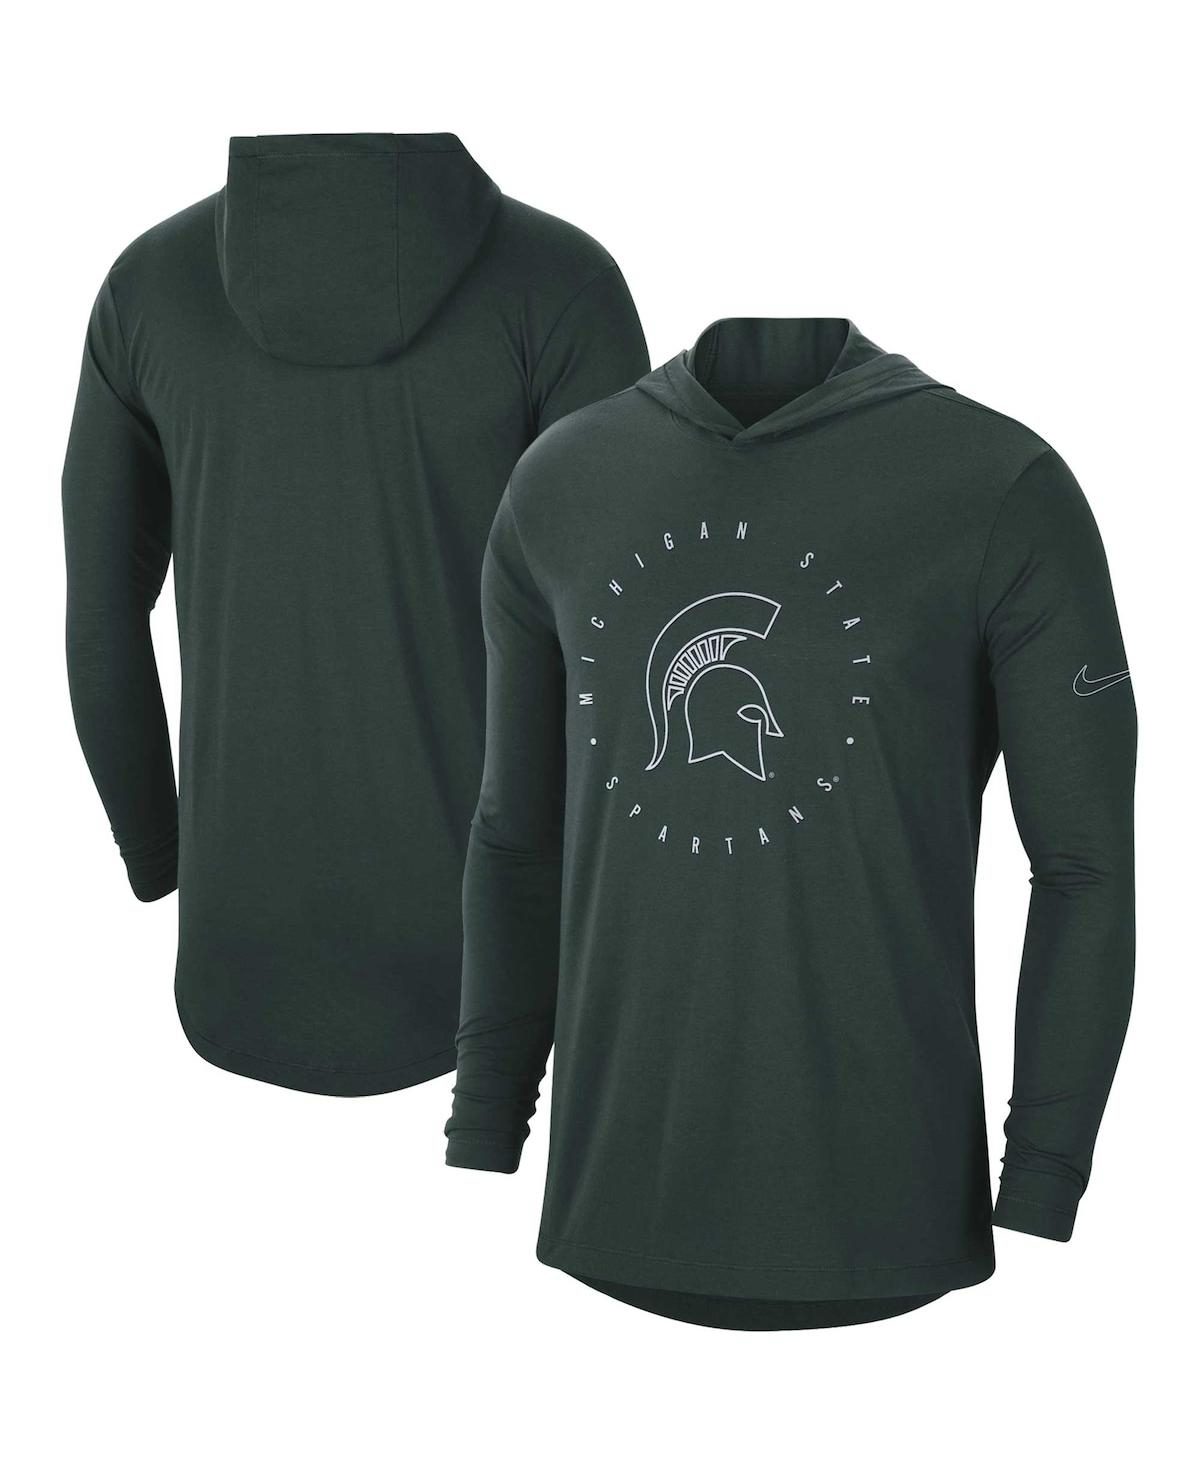 Shop Nike Men's  Green Michigan State Spartans Campus Tri-blend Performance Long Sleeve Hooded T-shirt